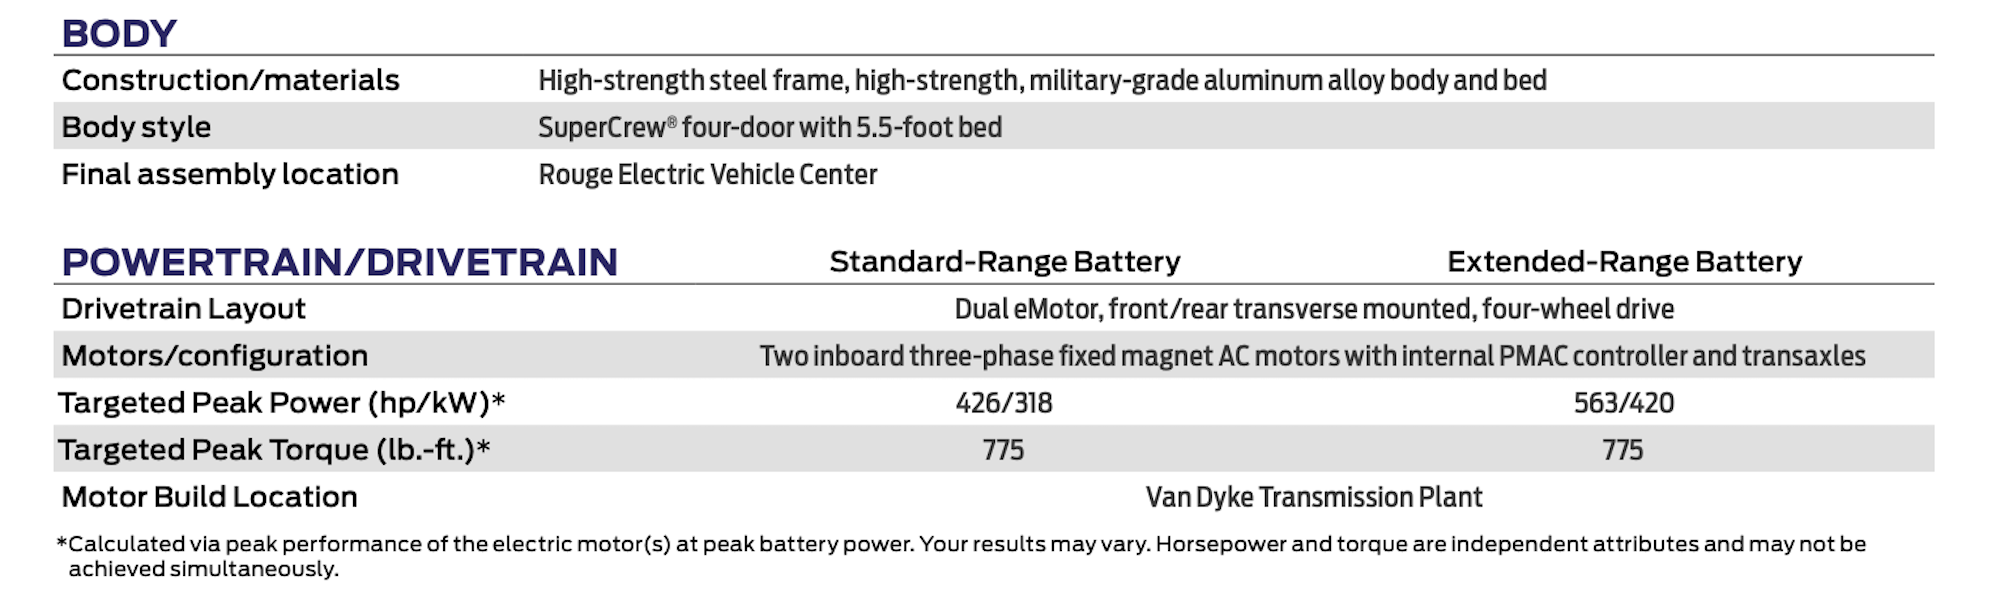 A chart showing the 2022 Ford F-150 Lighting's body construction and powertrain/drivetrain details.